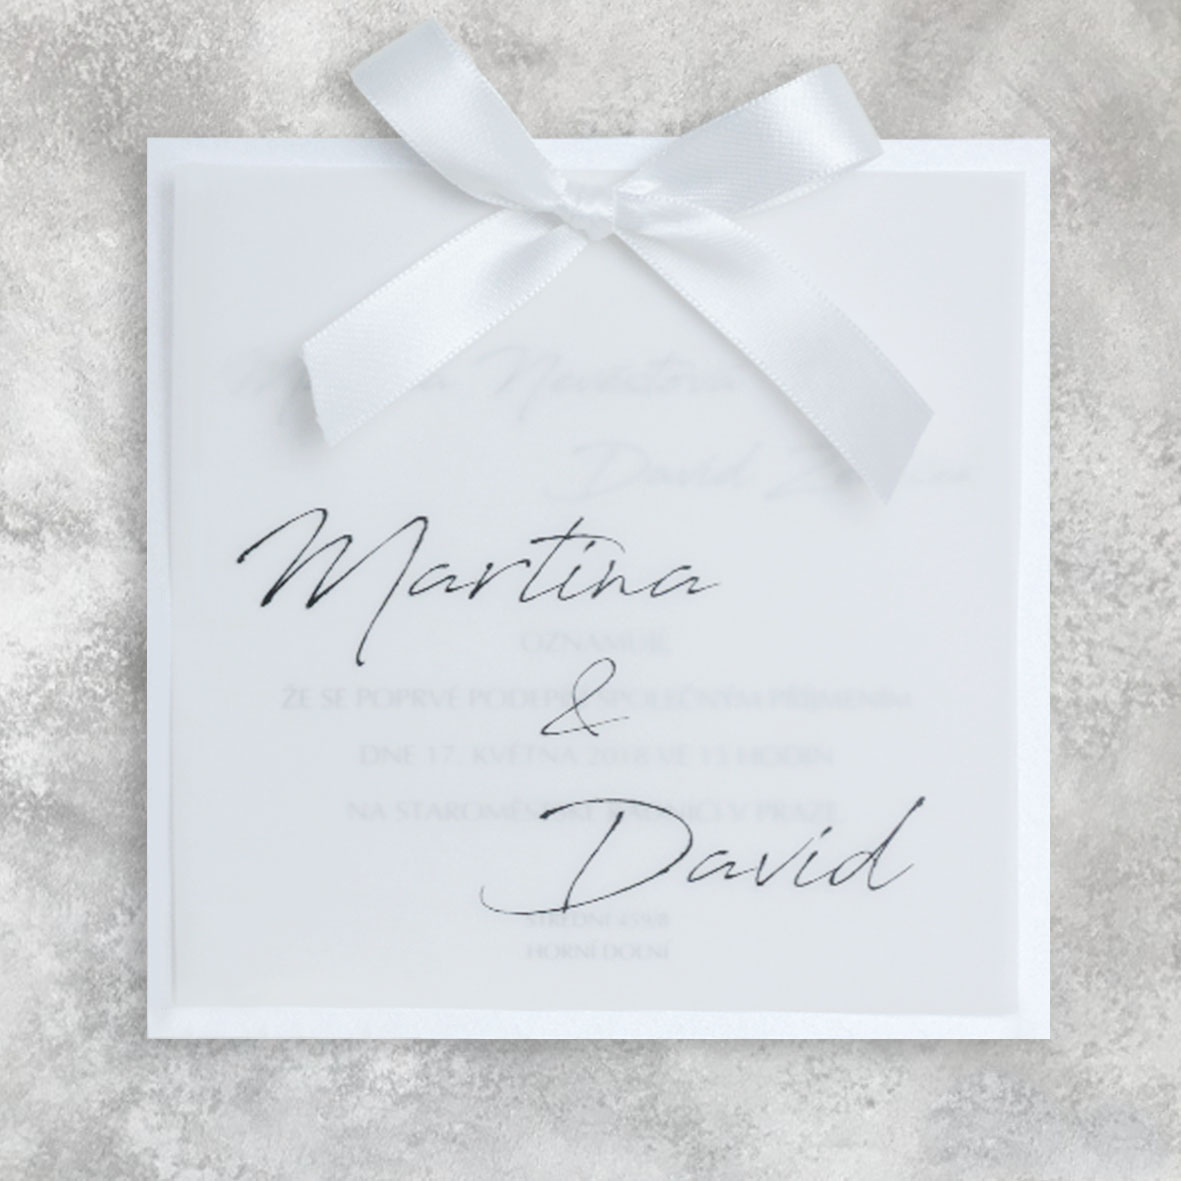 Transparent wedding invitation with a bow